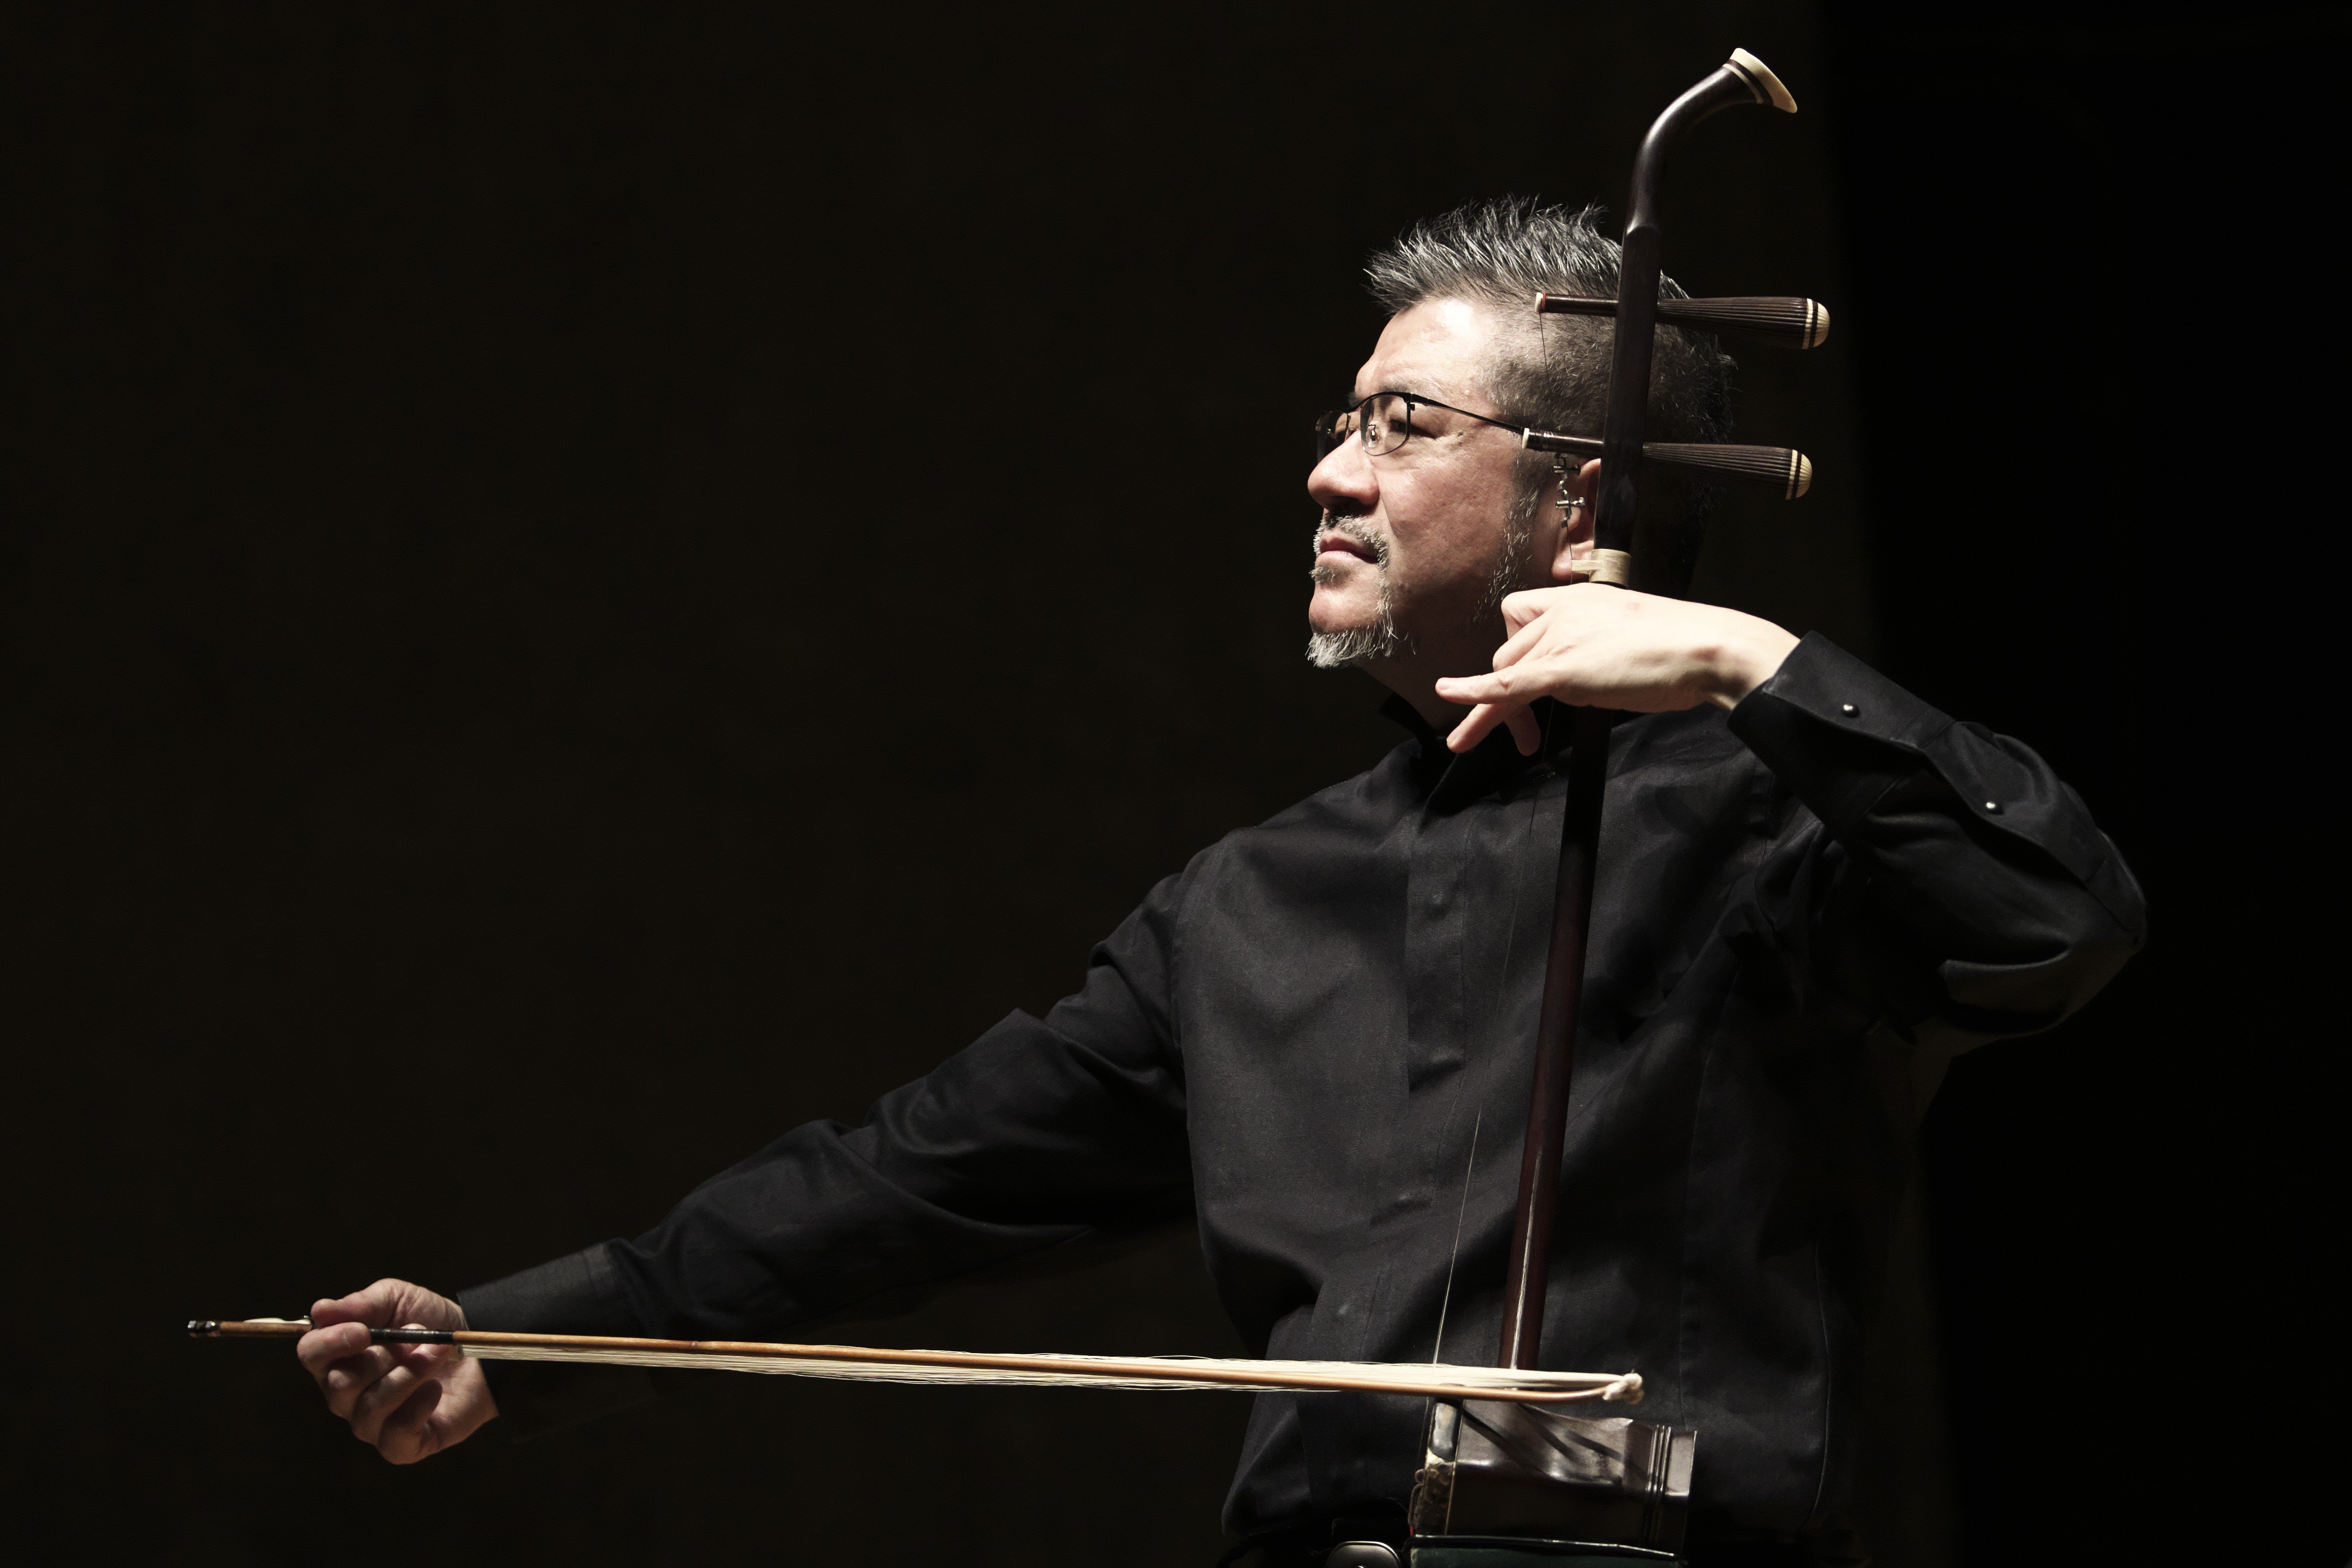 Chinese erhu virtuoso Xu Ke – dubbed the ‘Paganini of the erhu world’ – who has revolutionised the playing of the Chinese string instrument by adopting techniques used in Western classical music, will perform in Hong Kong with the Tokyo String Quintet on December 14.